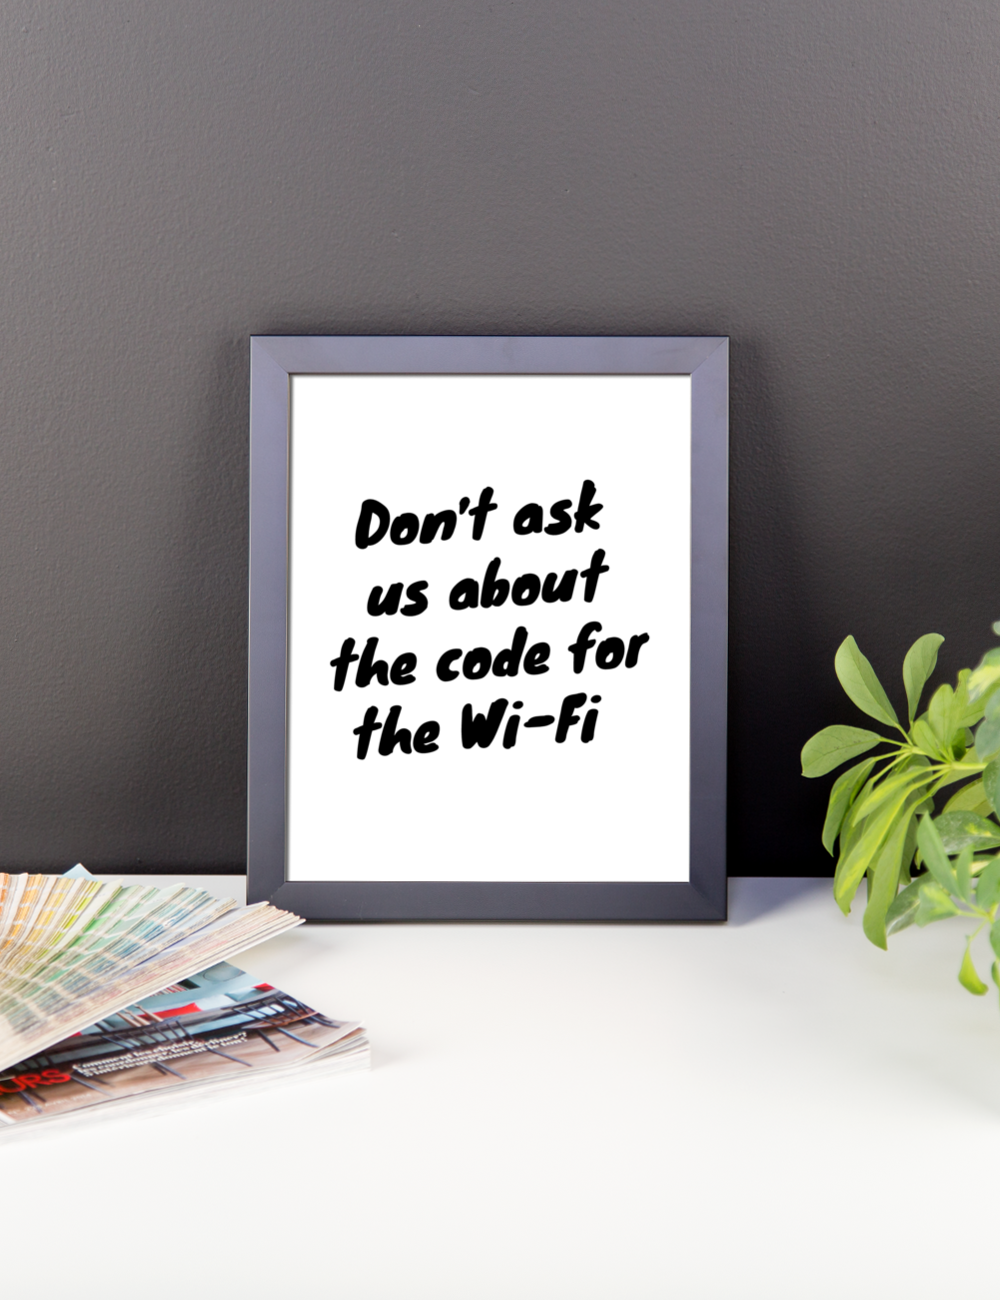 The Code For The Wi-Fi